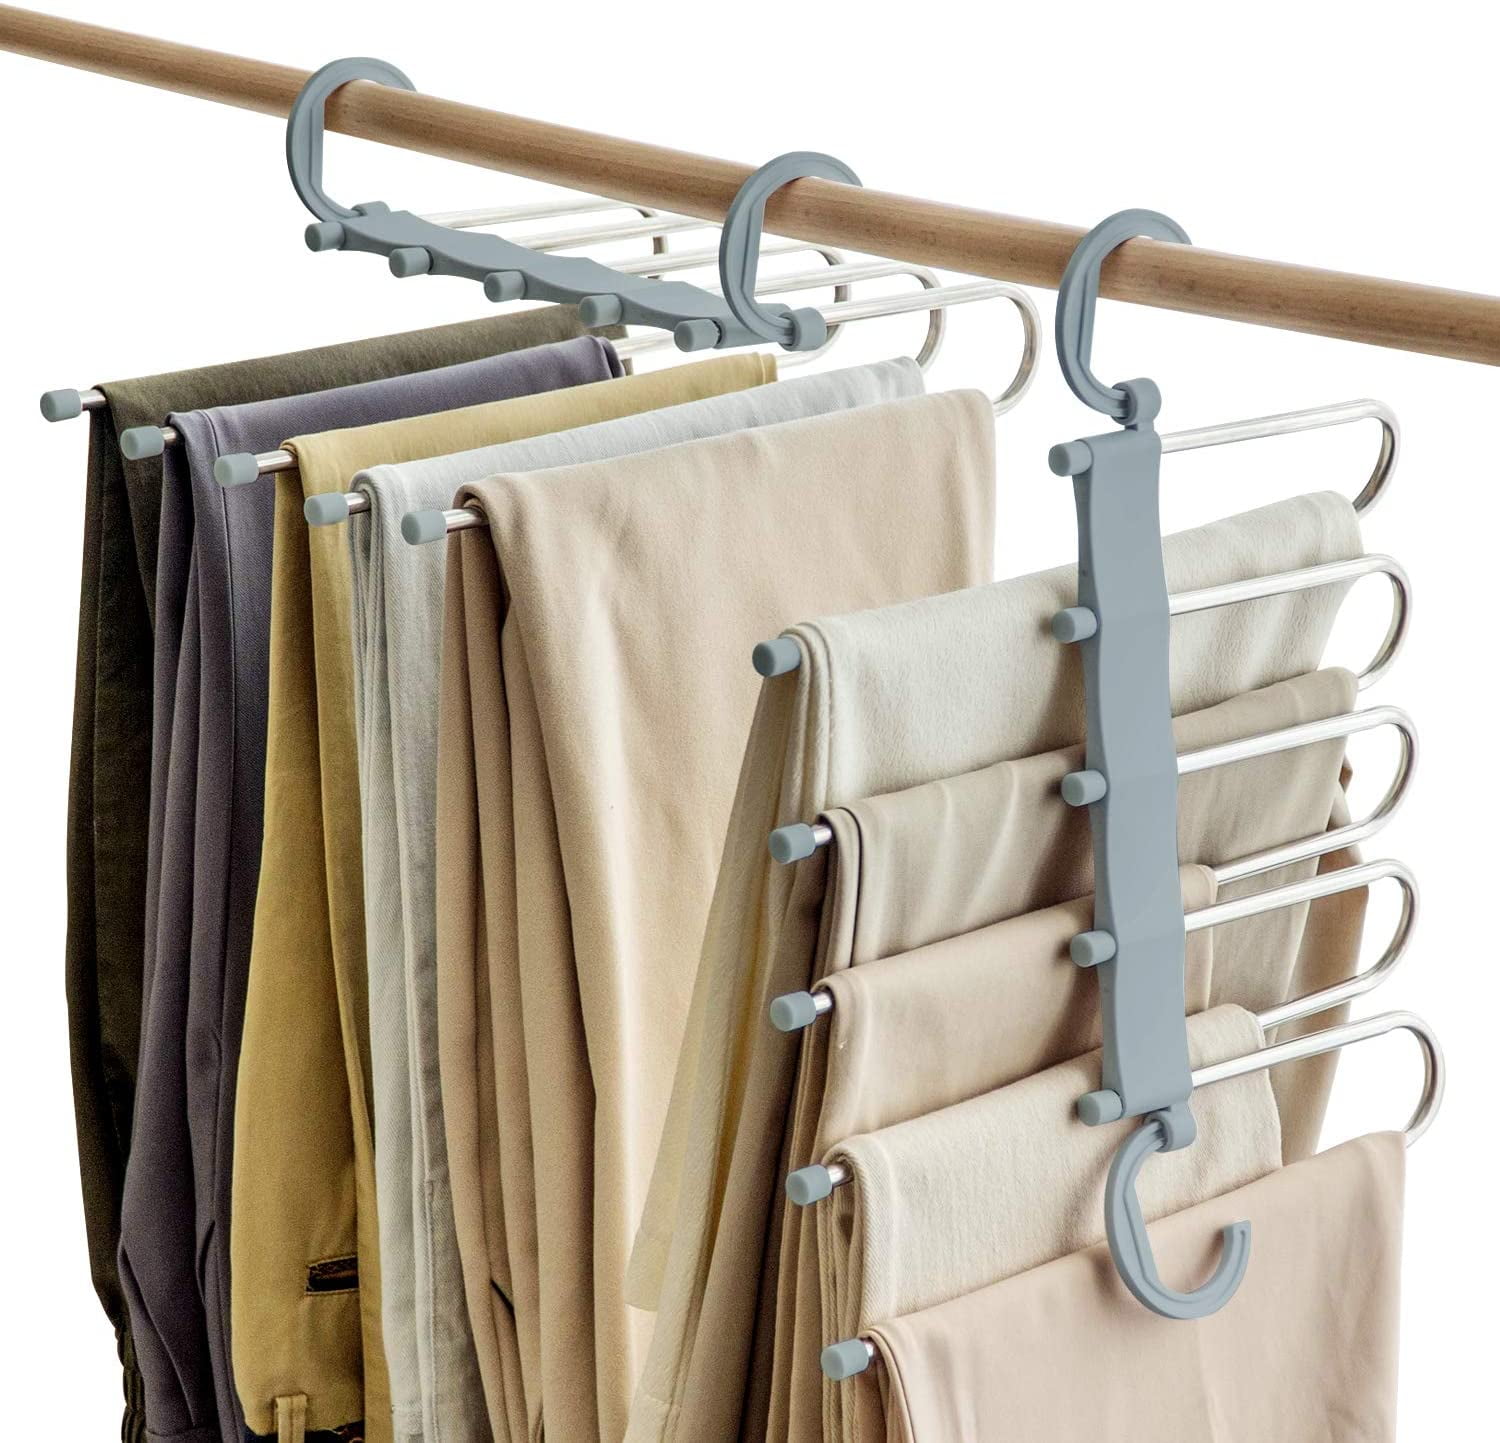 5 in 1 Multifunctional Storage Trousers Hangers Delisouls Pants Rack Shelves Non-Slip Closet Organizer for Scarfs Jeans Clothes Trousers Towels